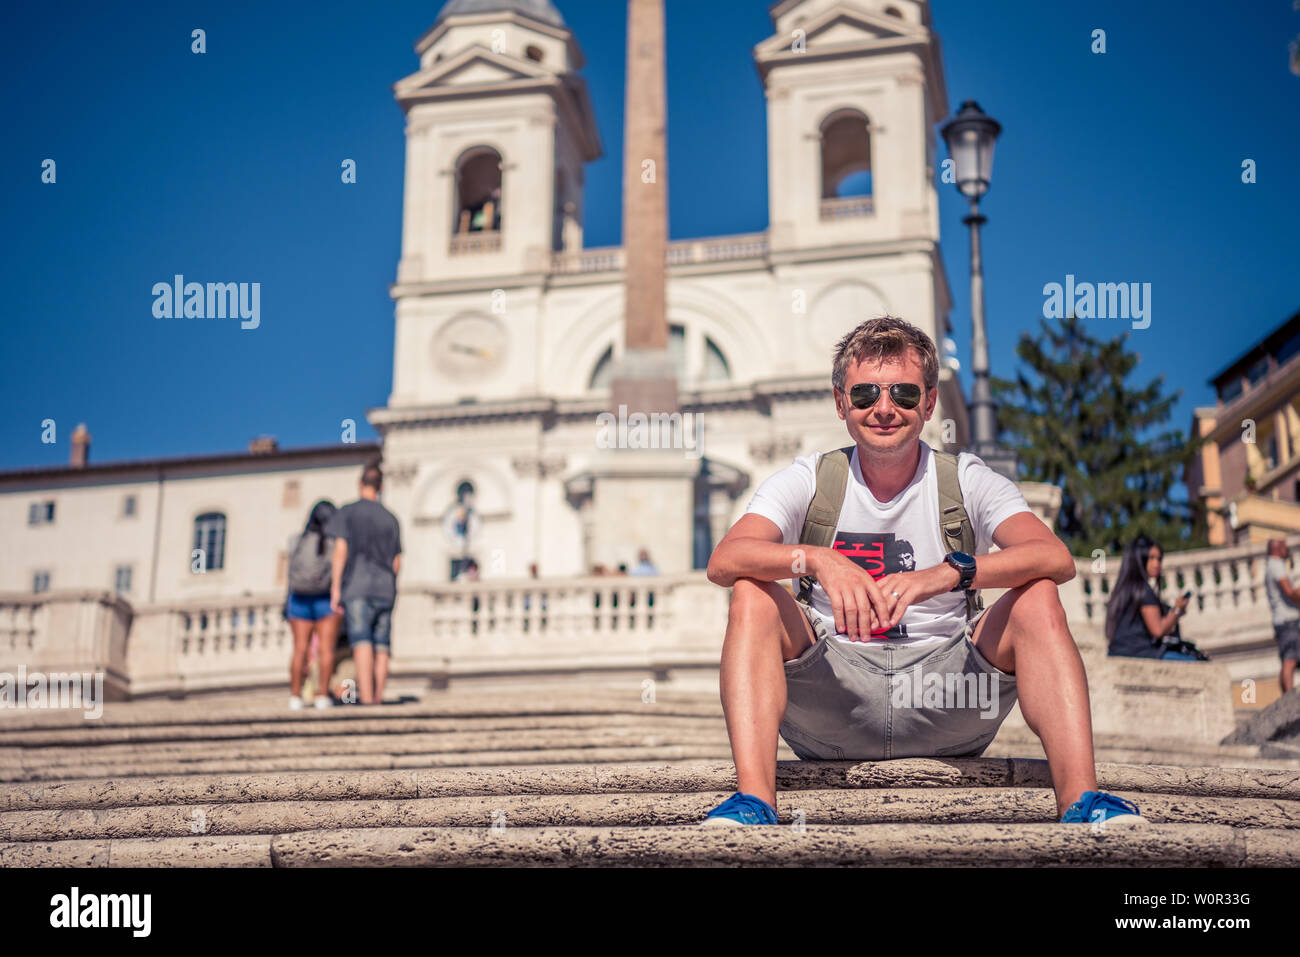 A tourist in the big world. With the backpack, walking equipment, sneakers, a smile on the face and a great deal of knowledge in the soul, the person Stock Photo